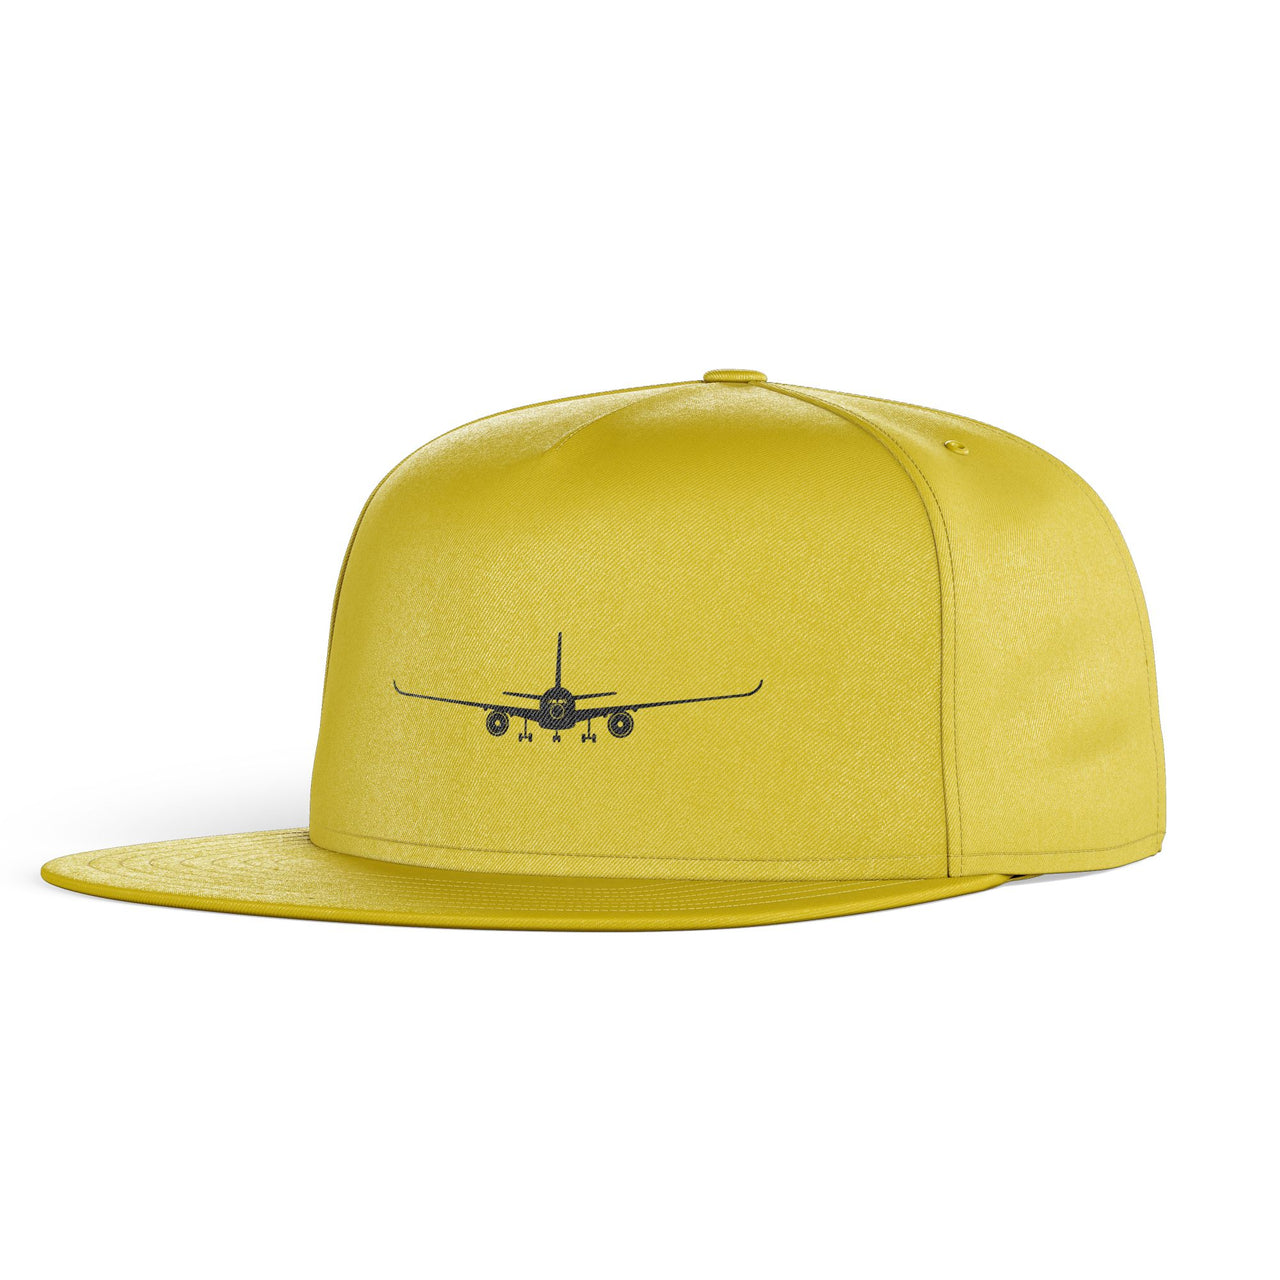 Airbus A350 Silhouette Designed Snapback Caps & Hats